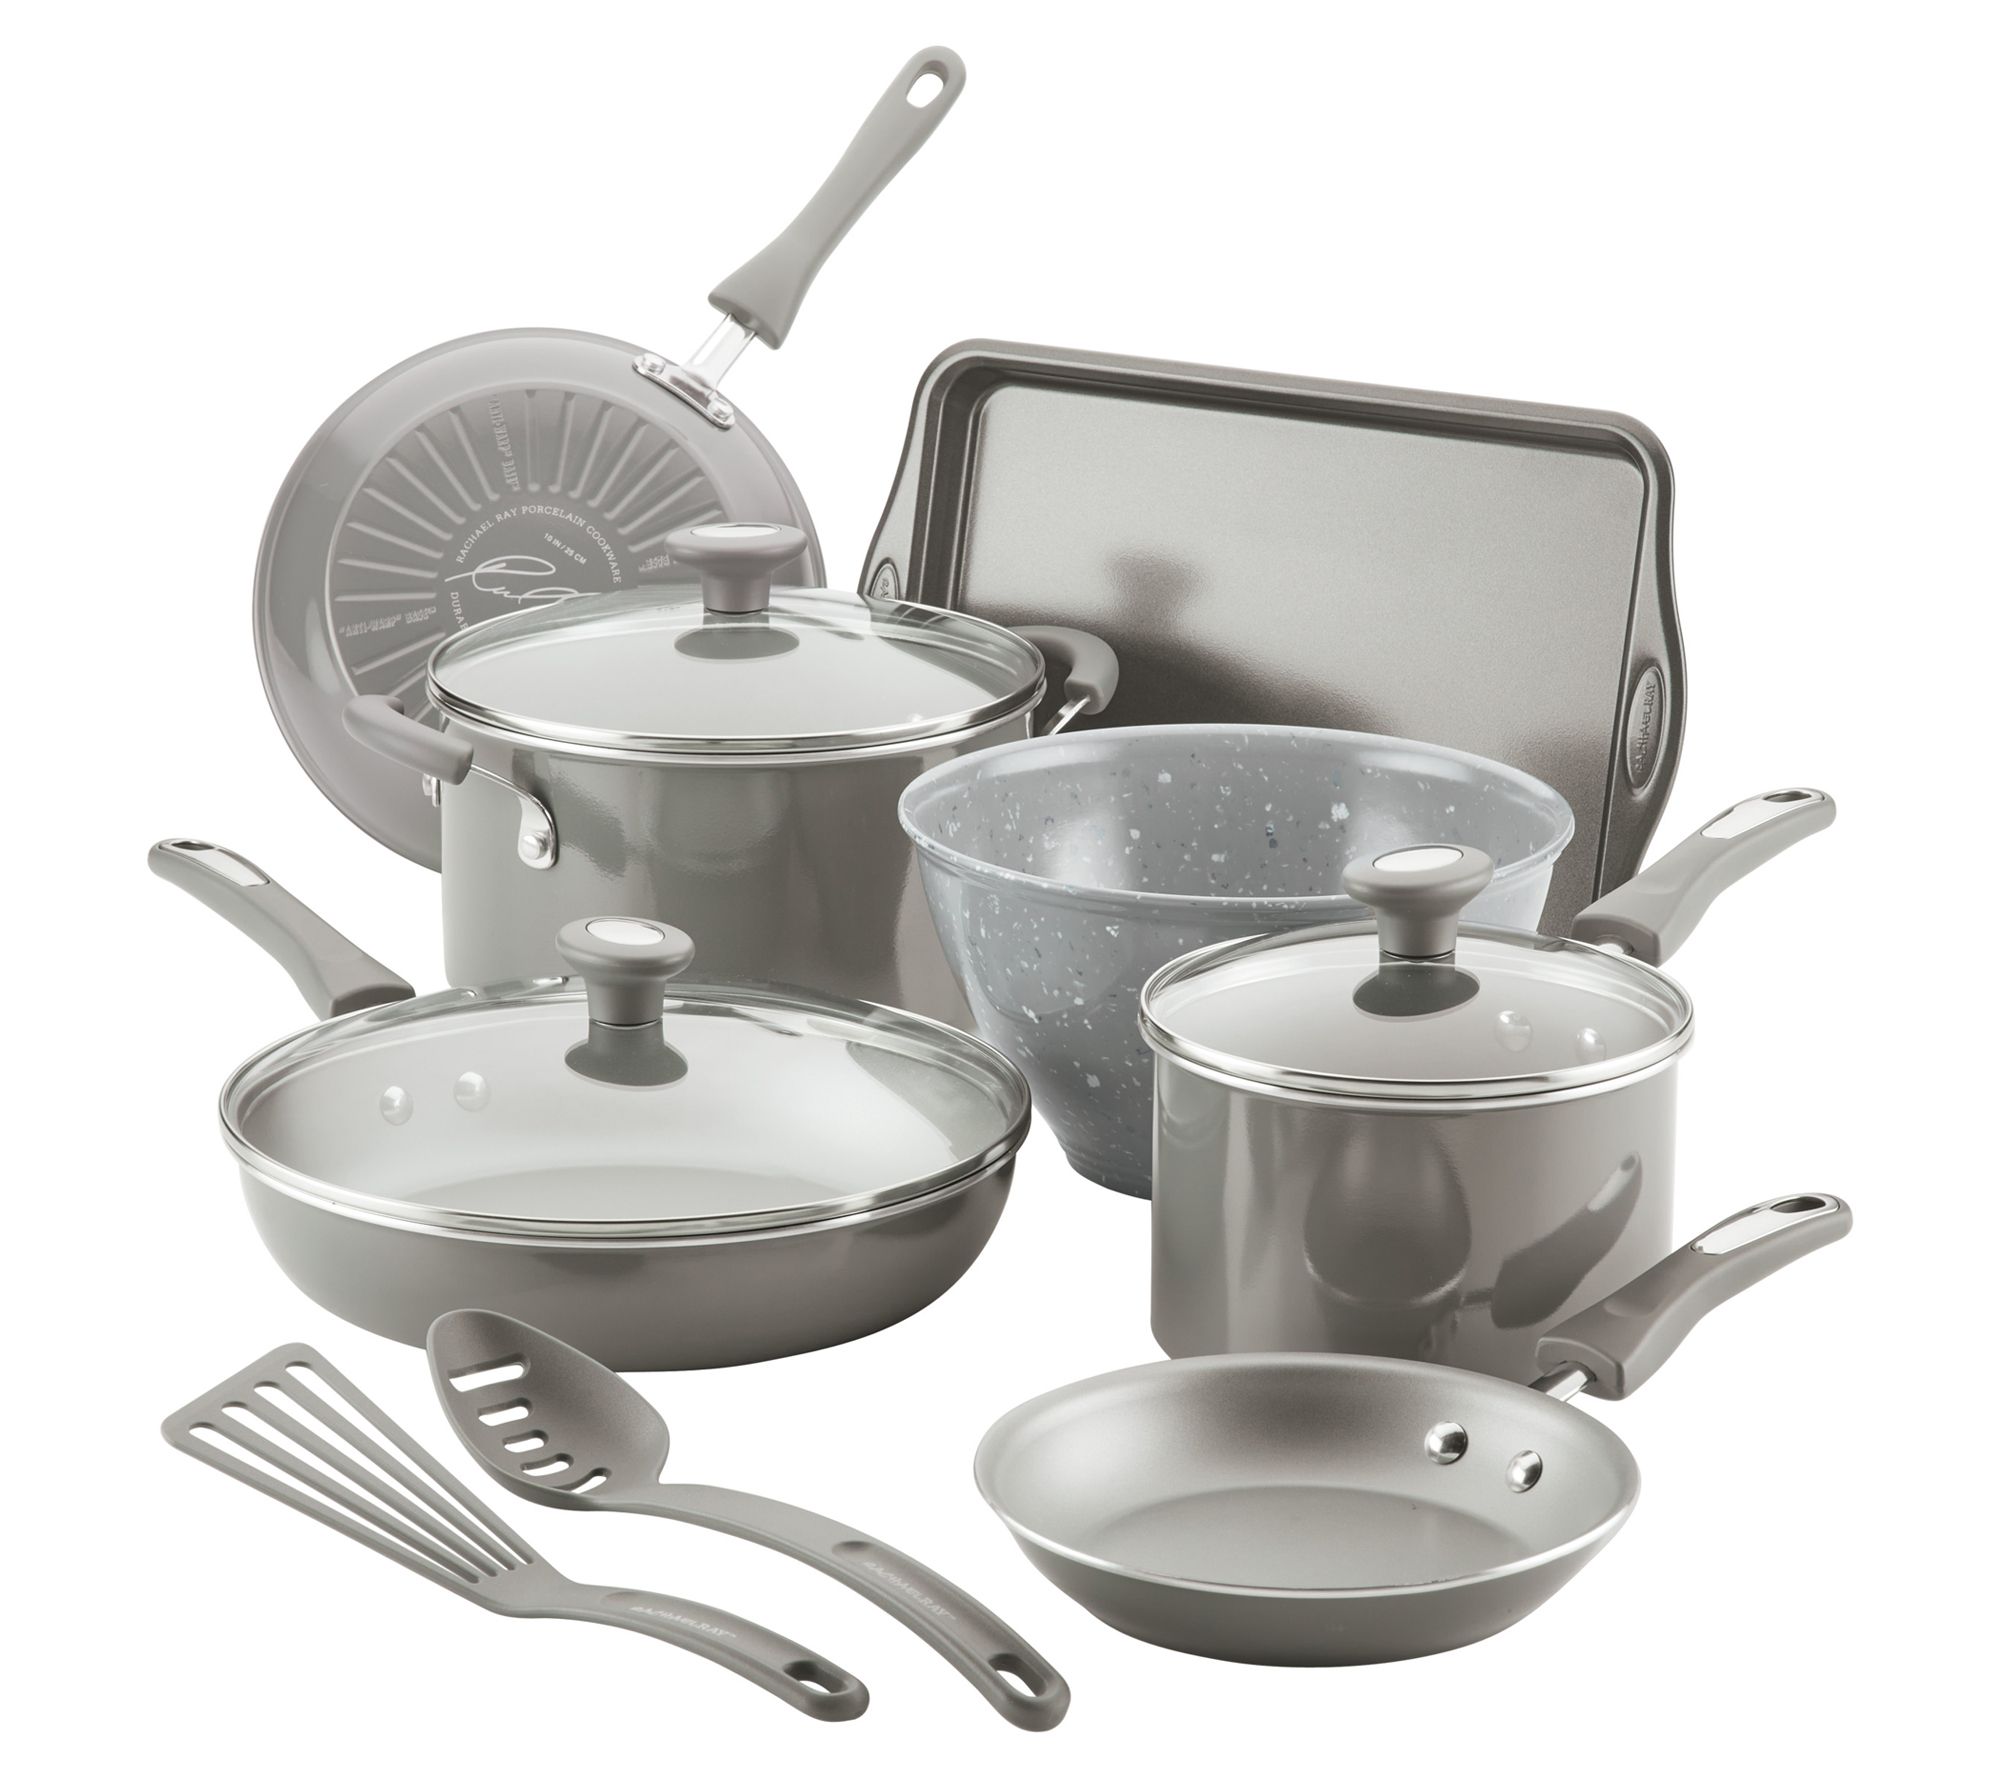 Rachael Ray Get Cooking] Nonstick Cookware Set,12pc, Gray 